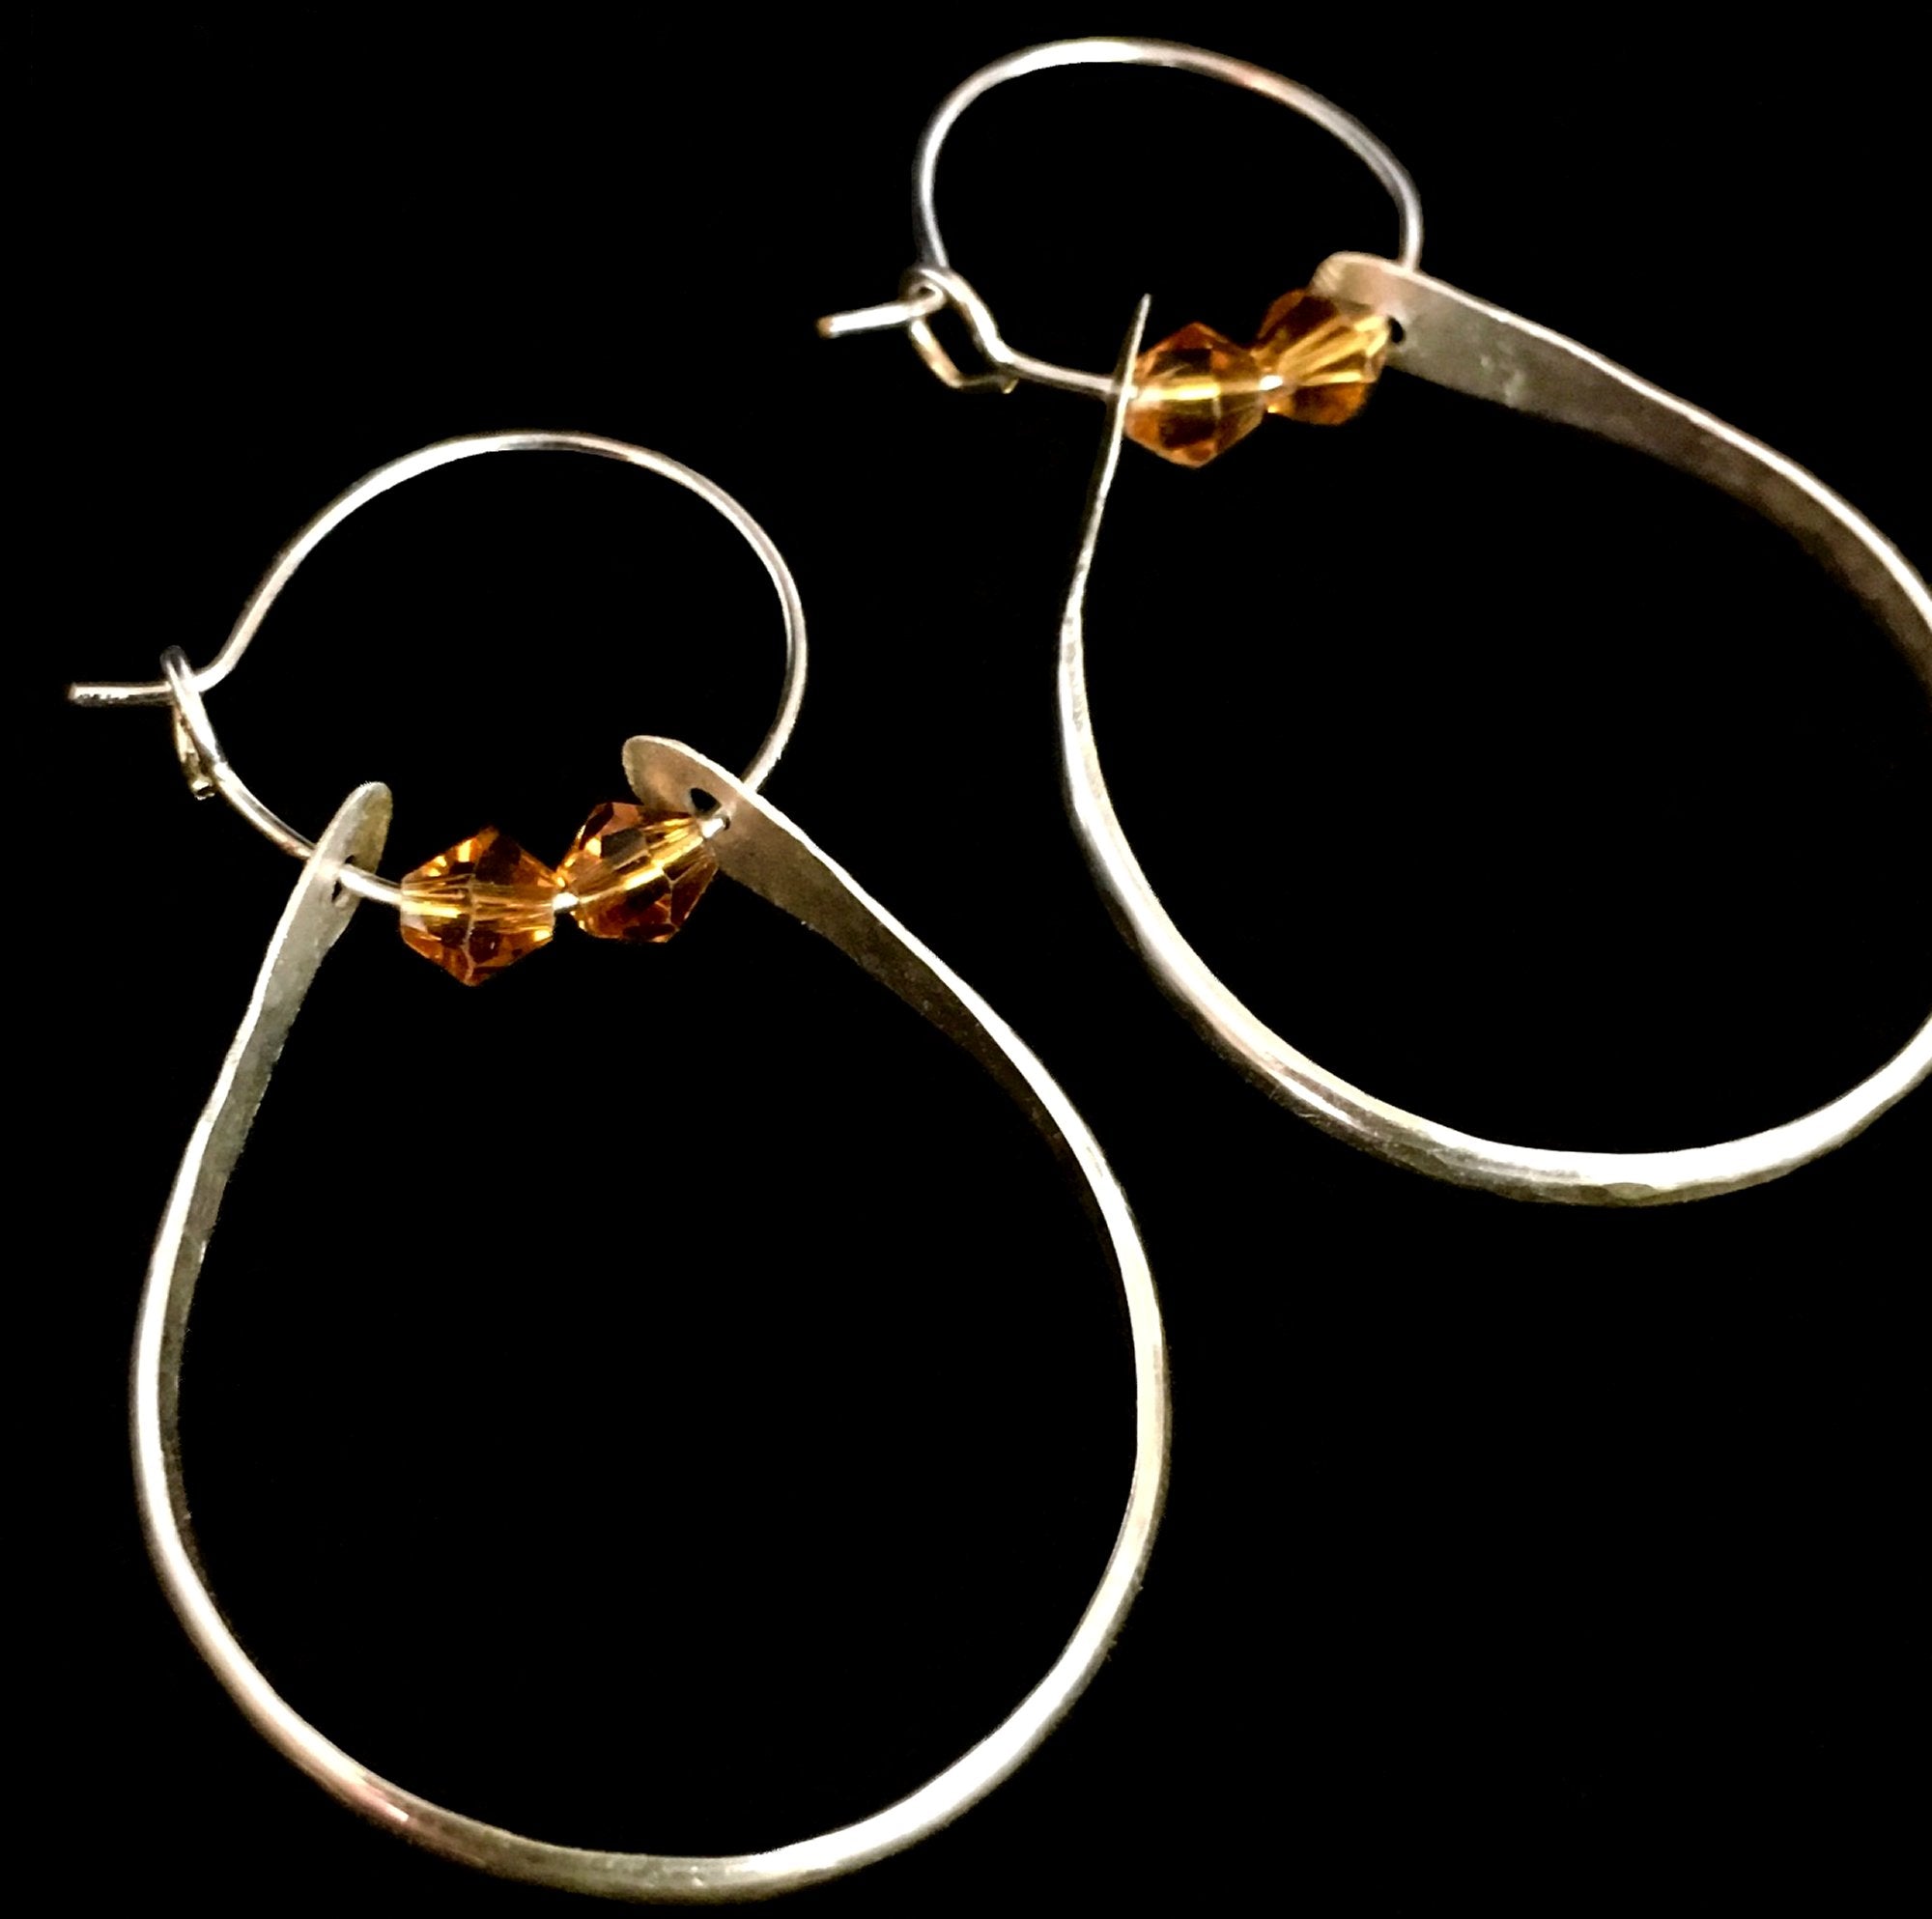 Hammered Sterling Silver Womens Double Hoop Earrings With Amber Swarovski Crystals